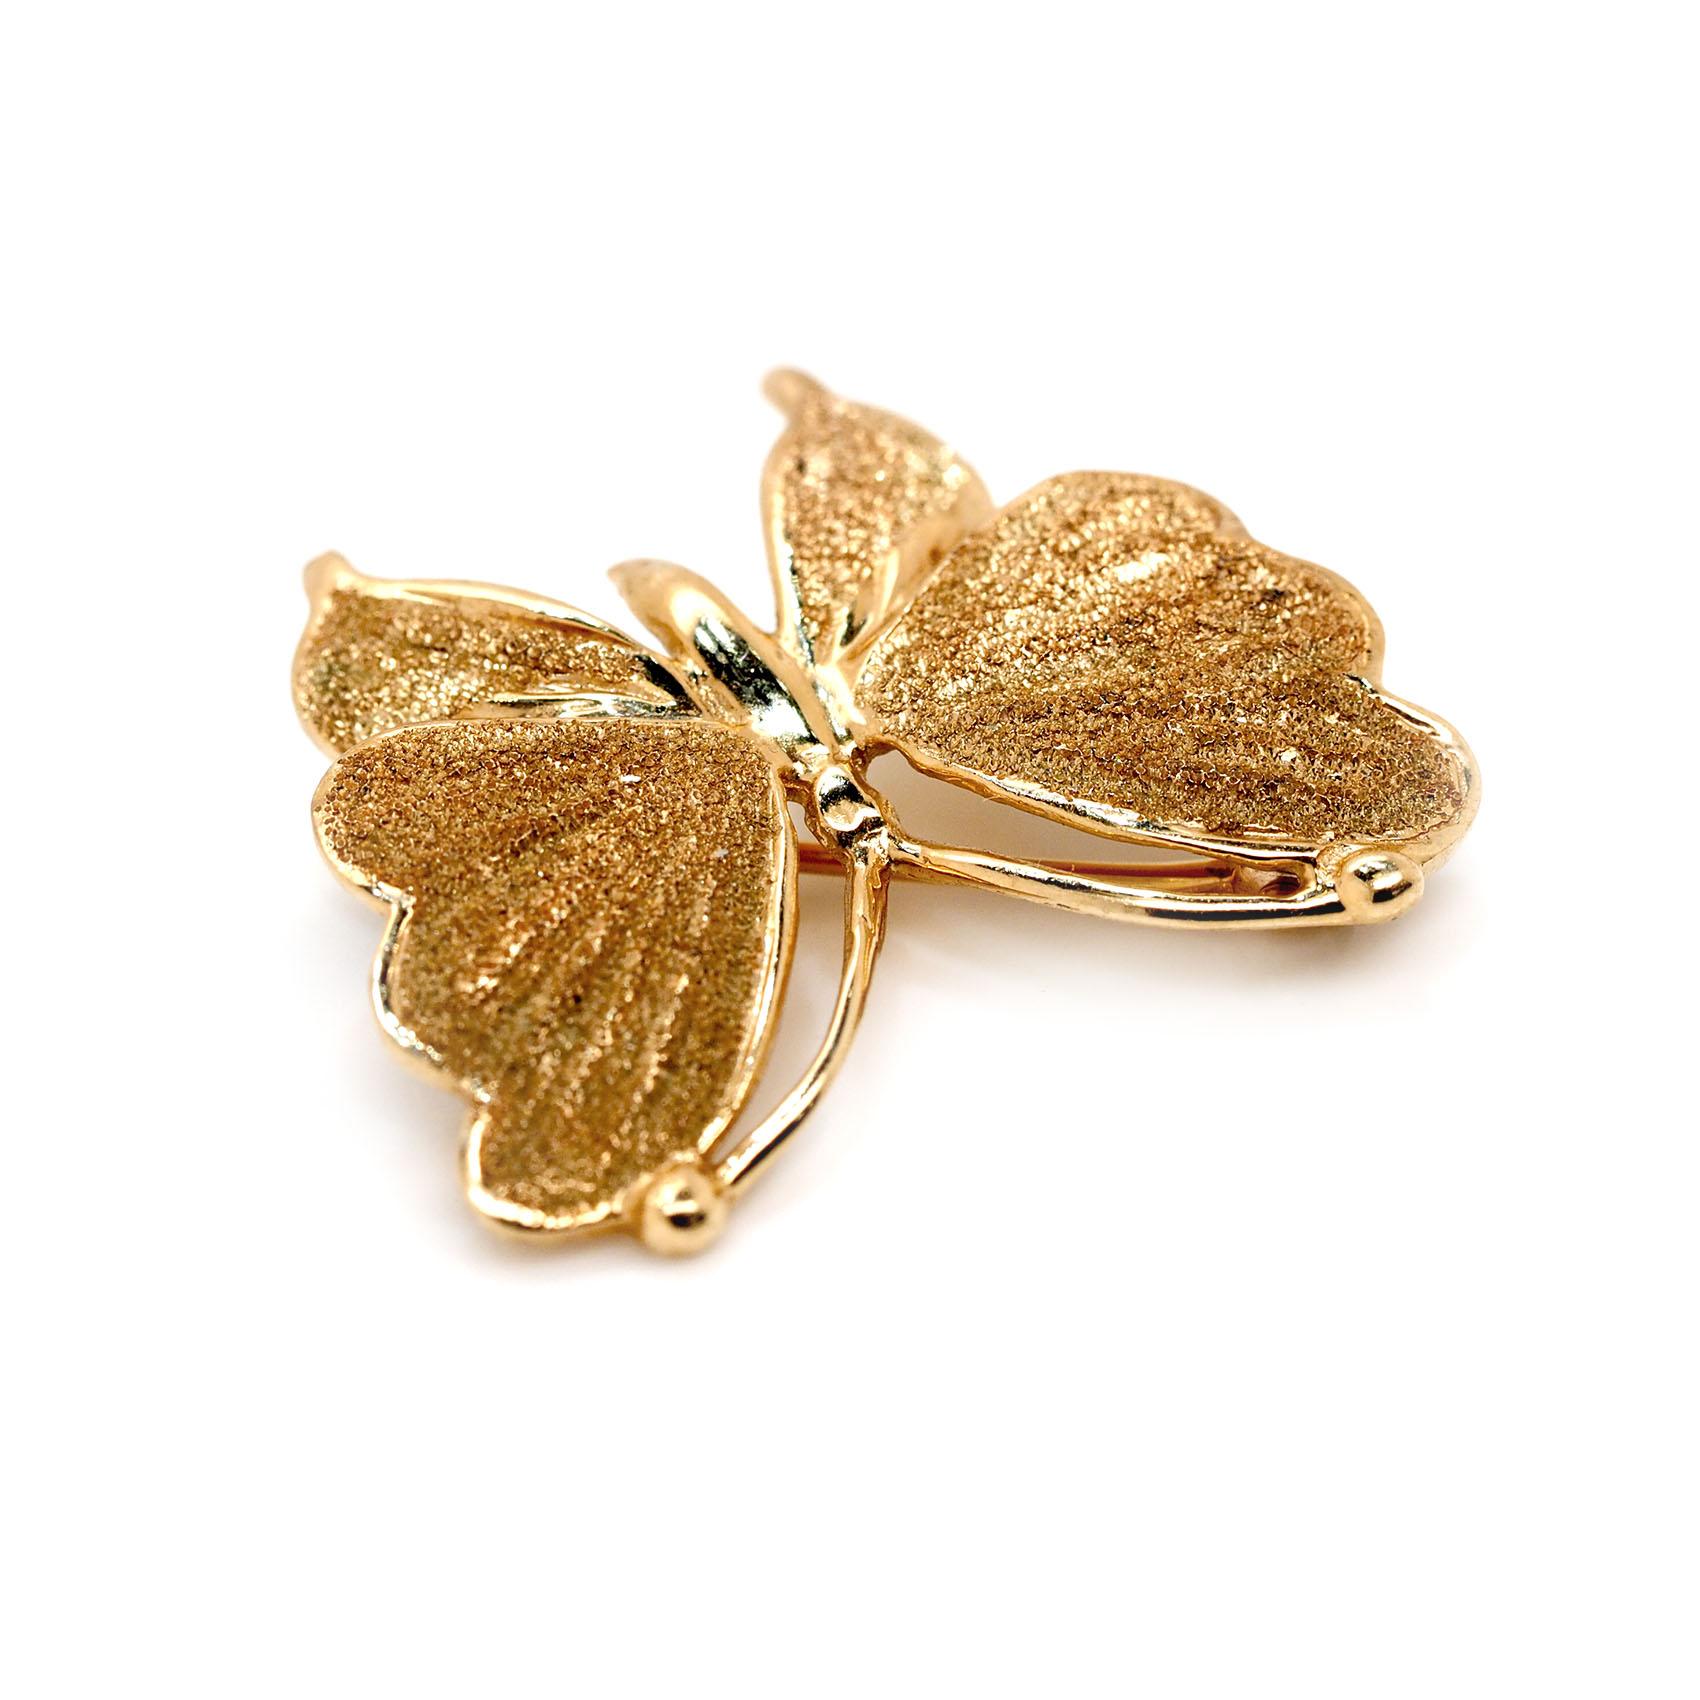 Please see this 14k Yellow Gold Butterfly Pin. I have shot images from various angles so you can see it completely (both front and back). This piece weighs 5.0 grams total. 